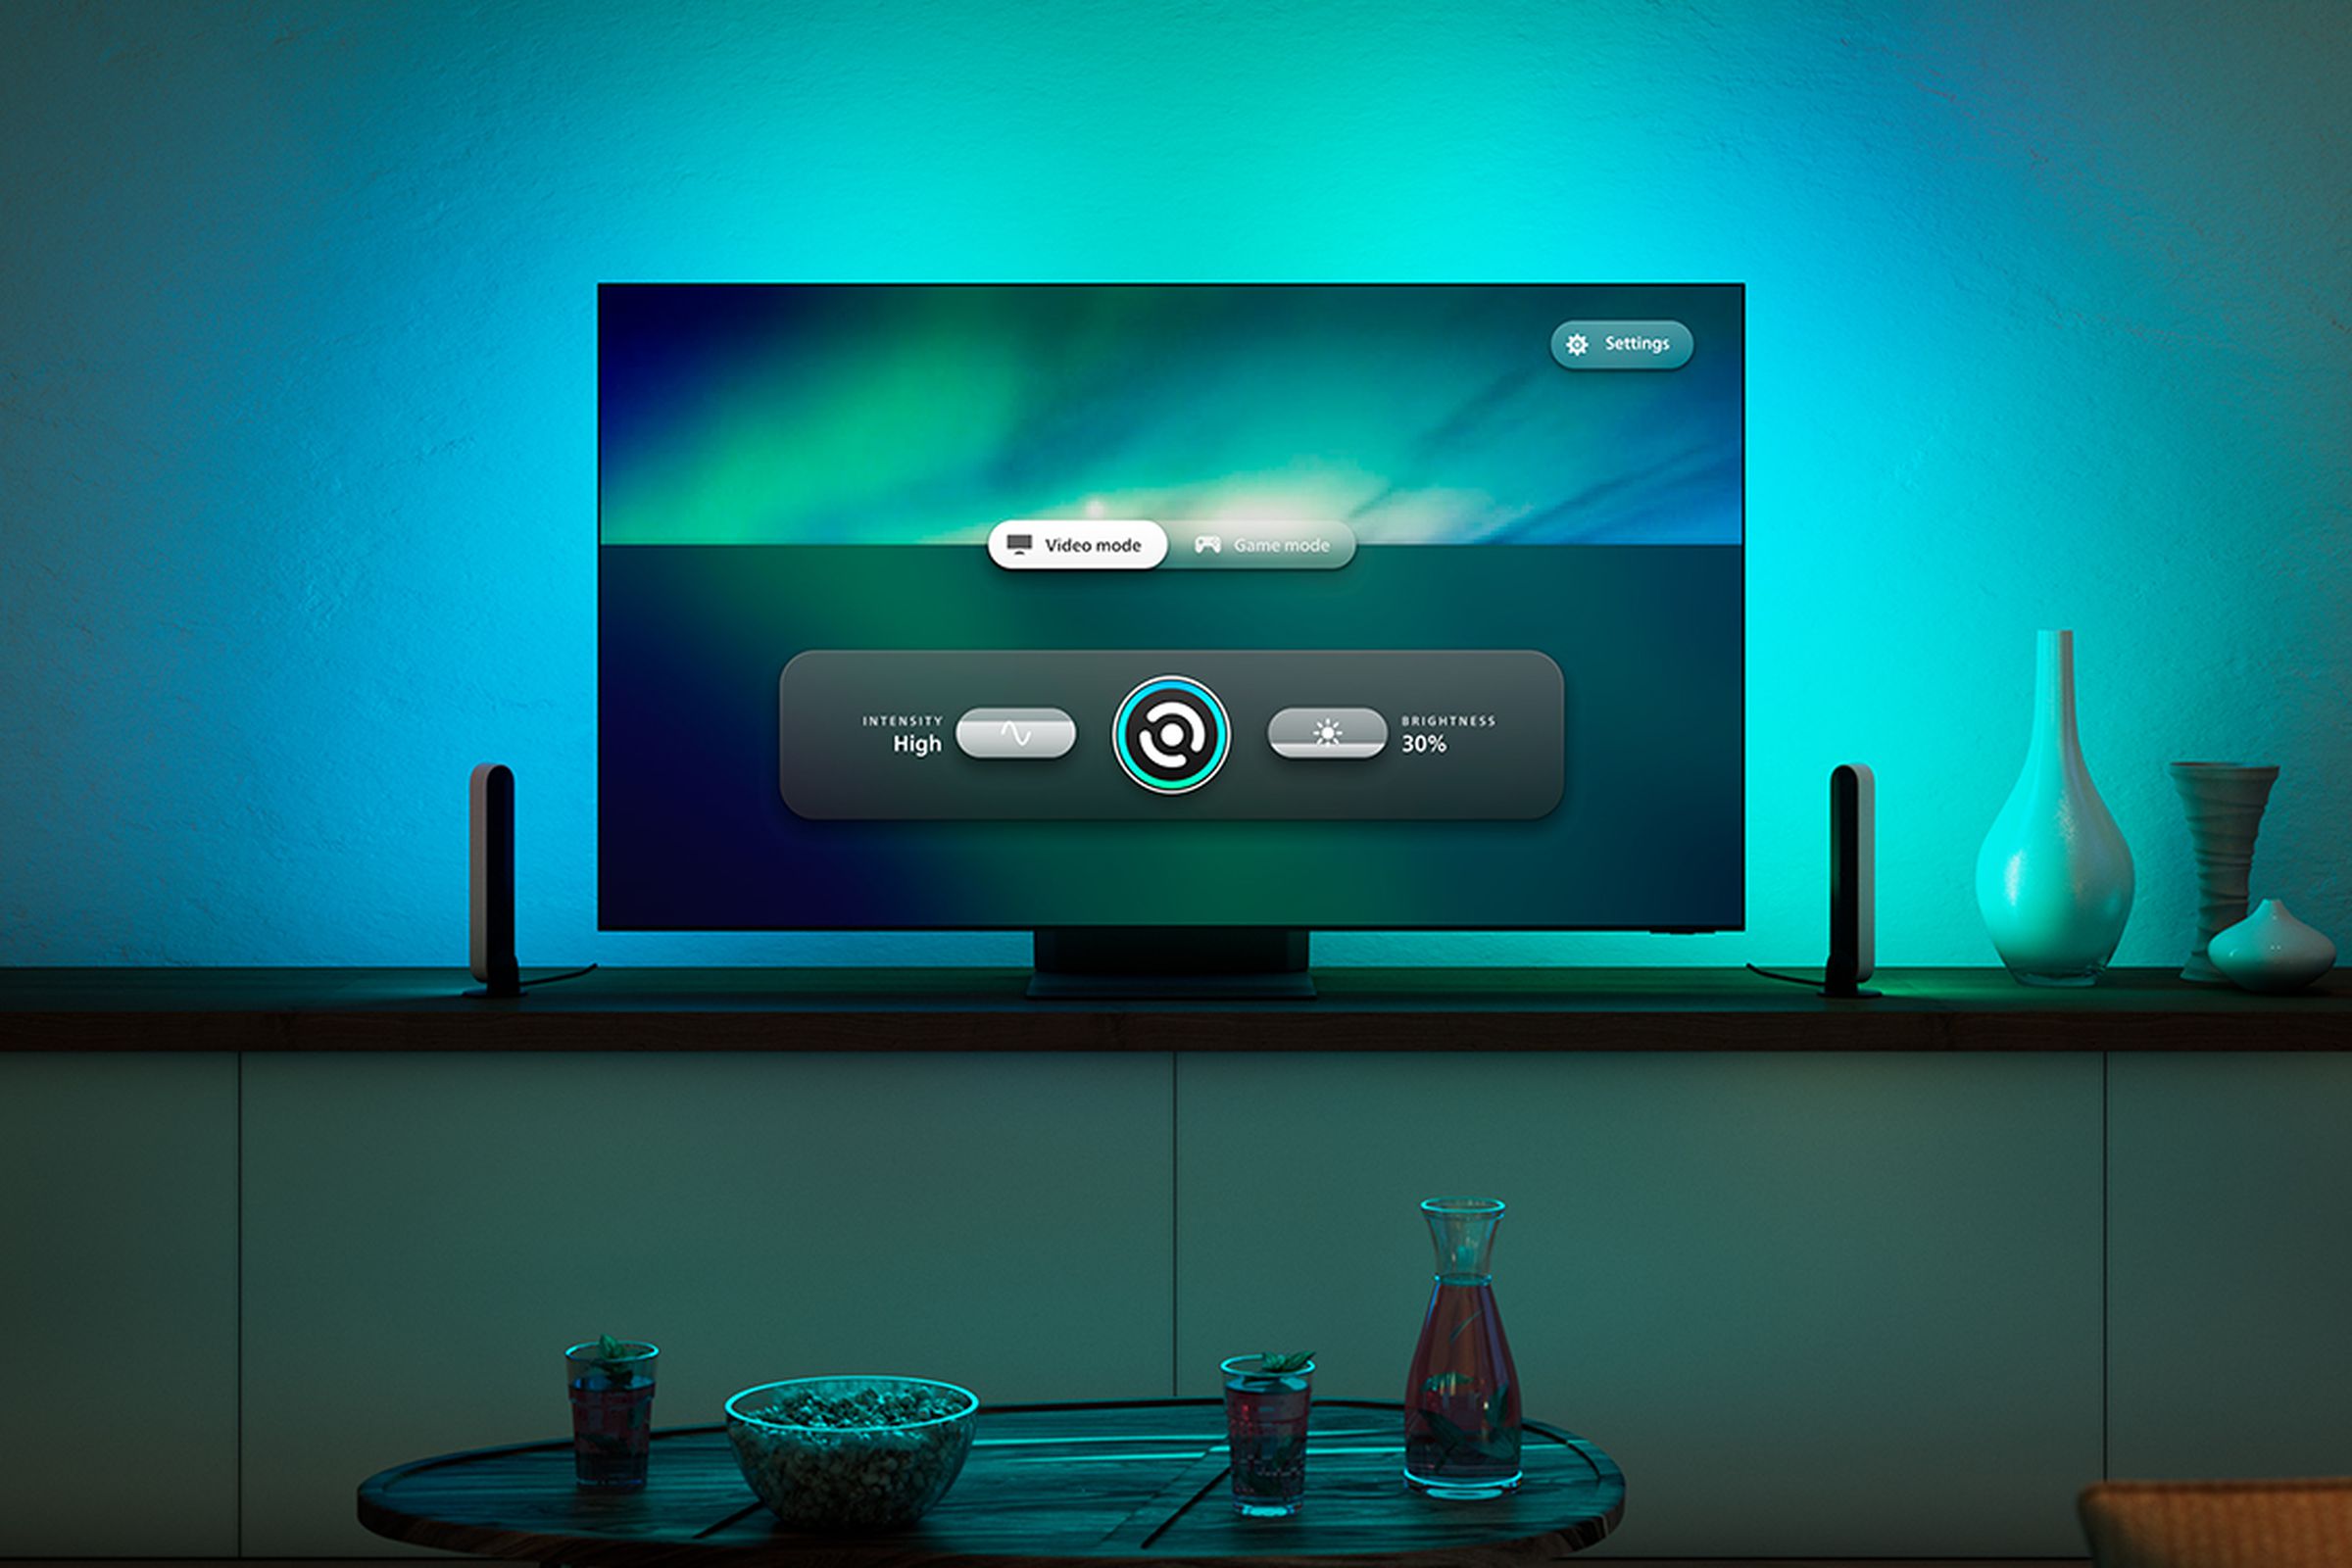 A Philips Hue app running on a Samsung TV and illuminating the rear of the TV with blue light